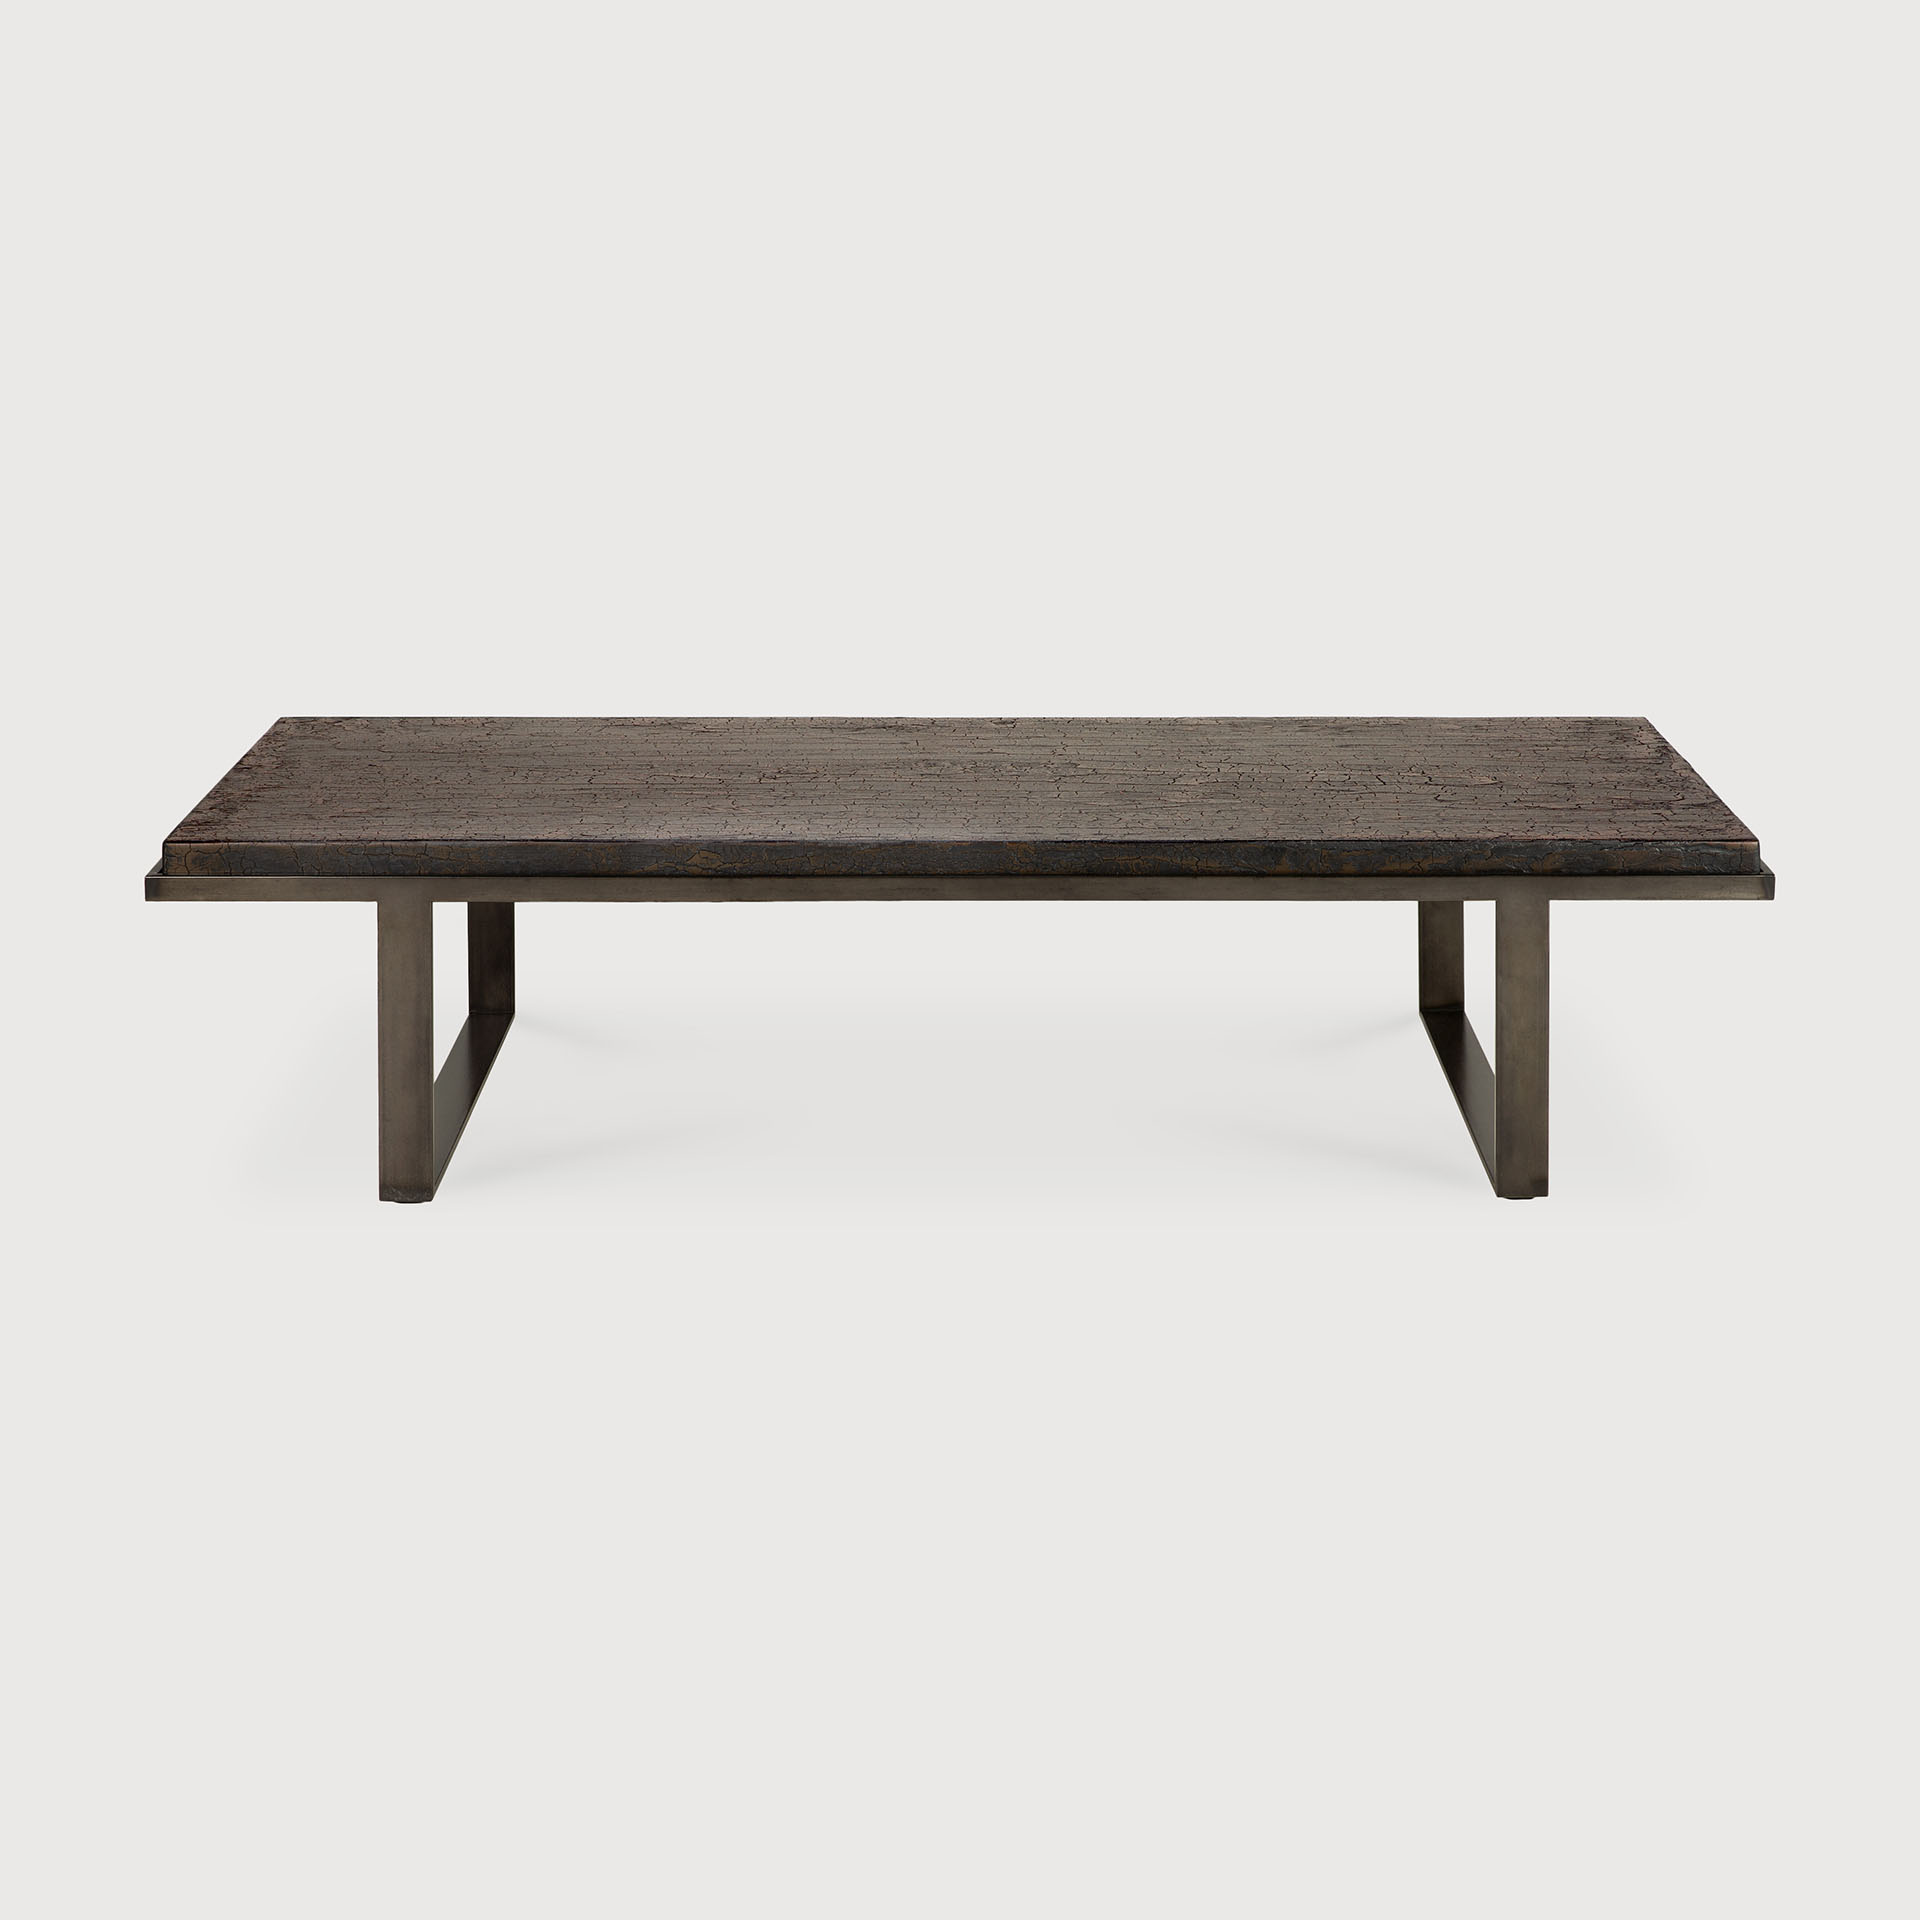 [25944*] Stability coffee table